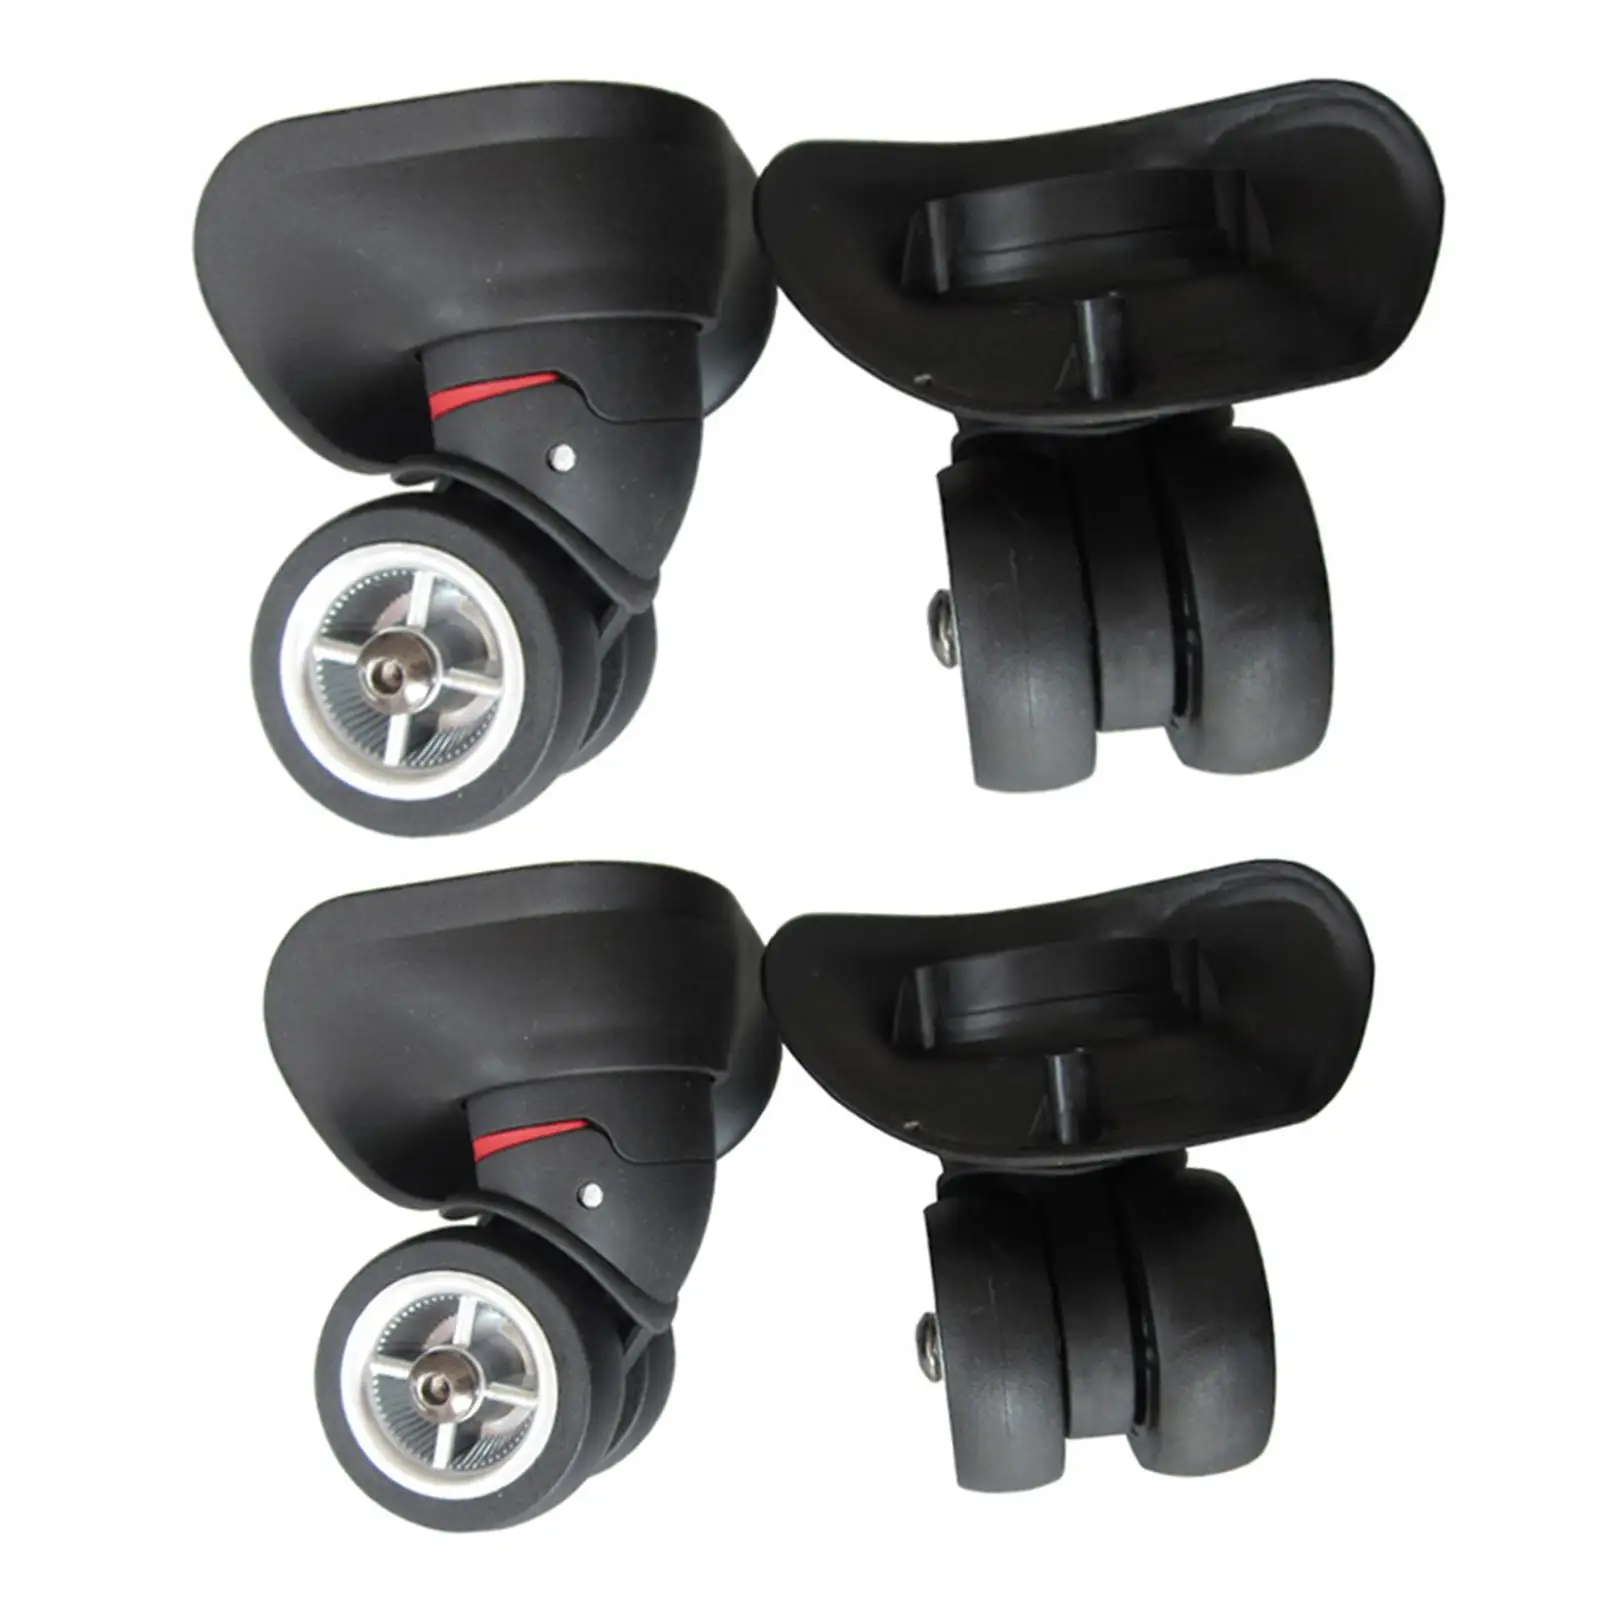 

A08 Luggage Wheel Replacement Universal Swivel Casters Durable Travel Suitcase Wheels Luggage Mute Wheel Suitcase